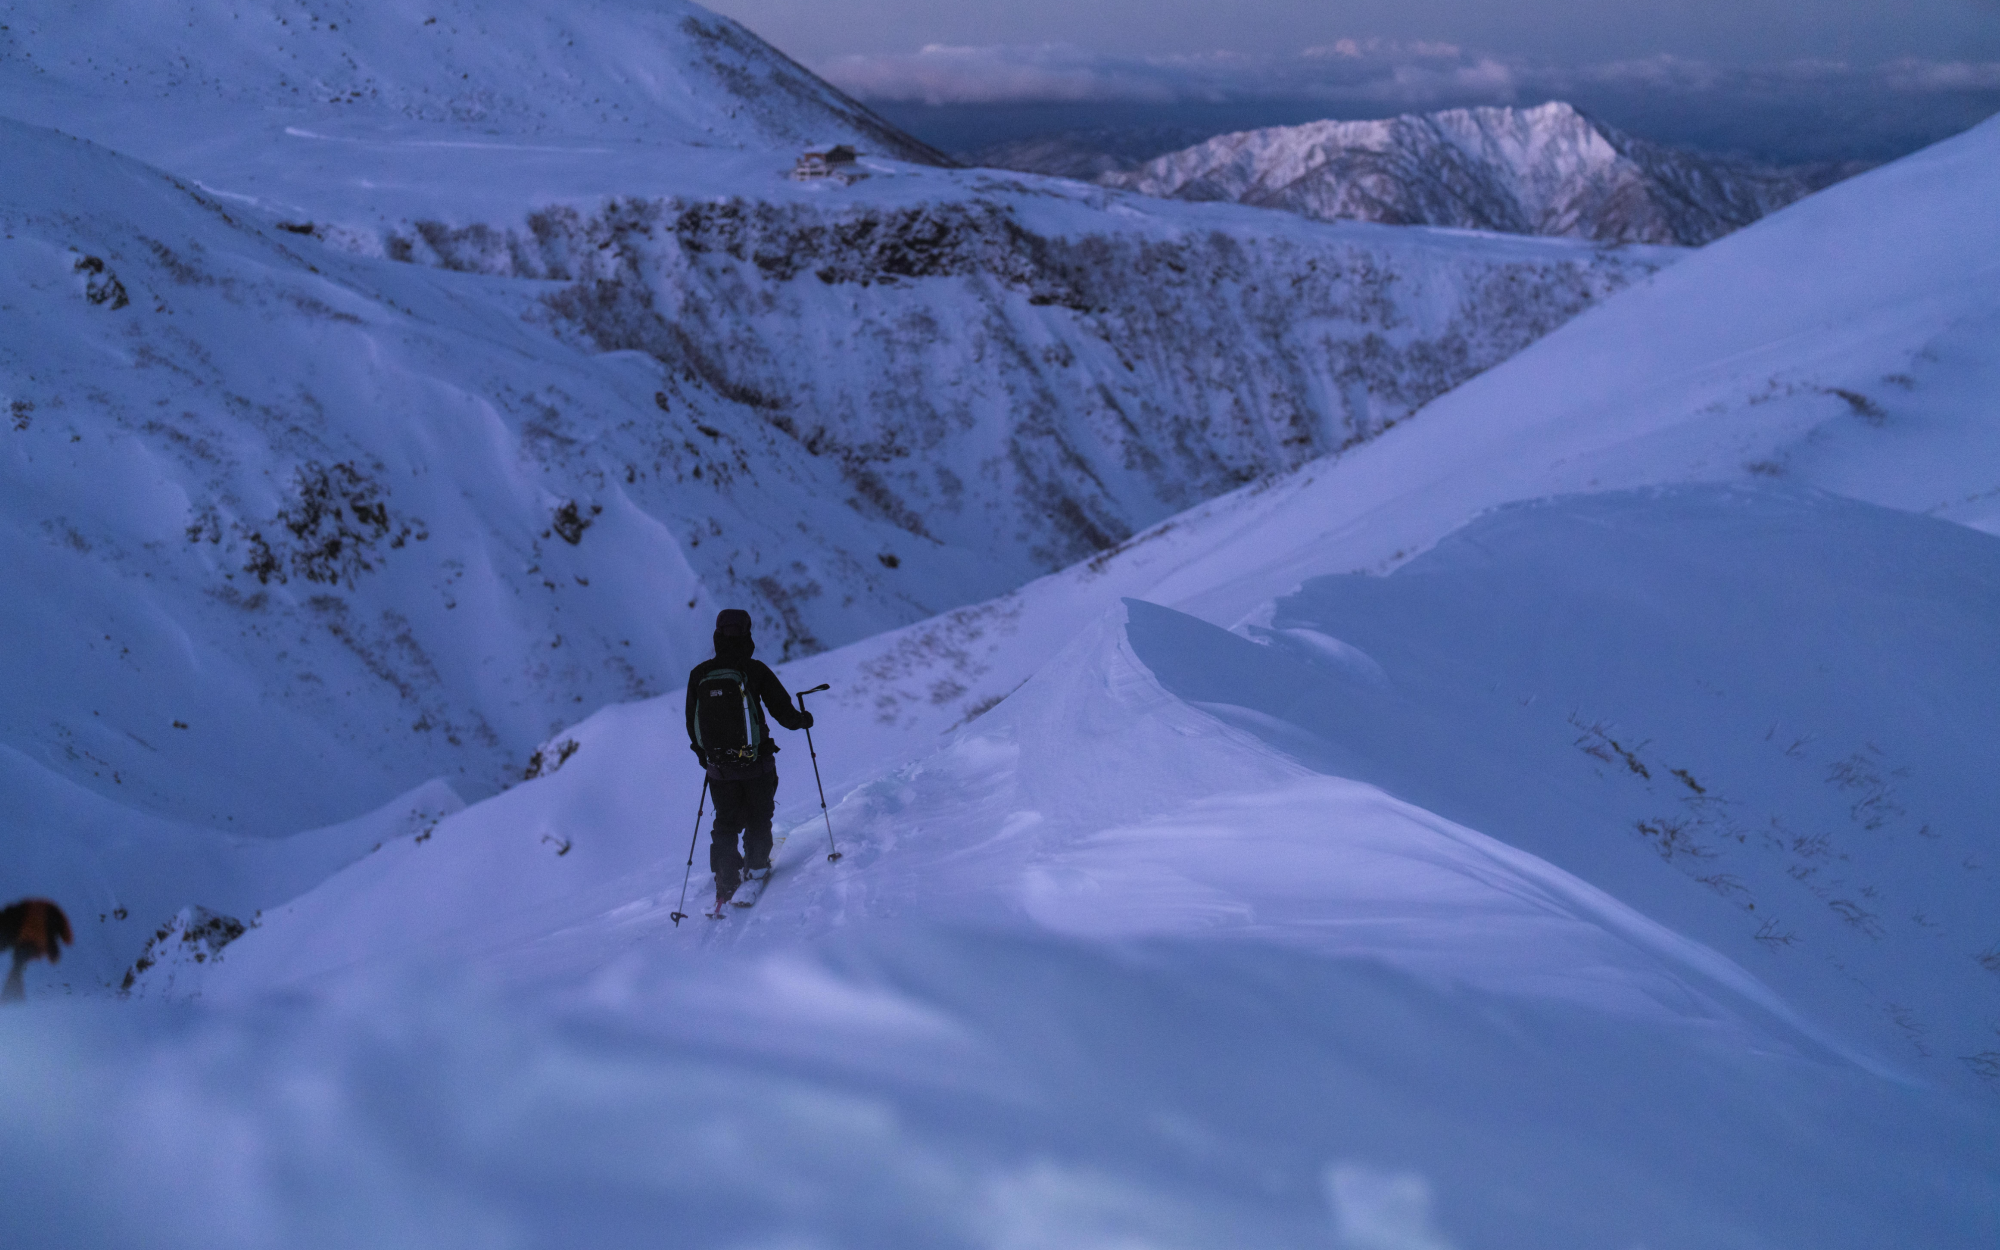 Keisuke takes in the view at dusk while skinning into the top of the run at Big Day mountain.